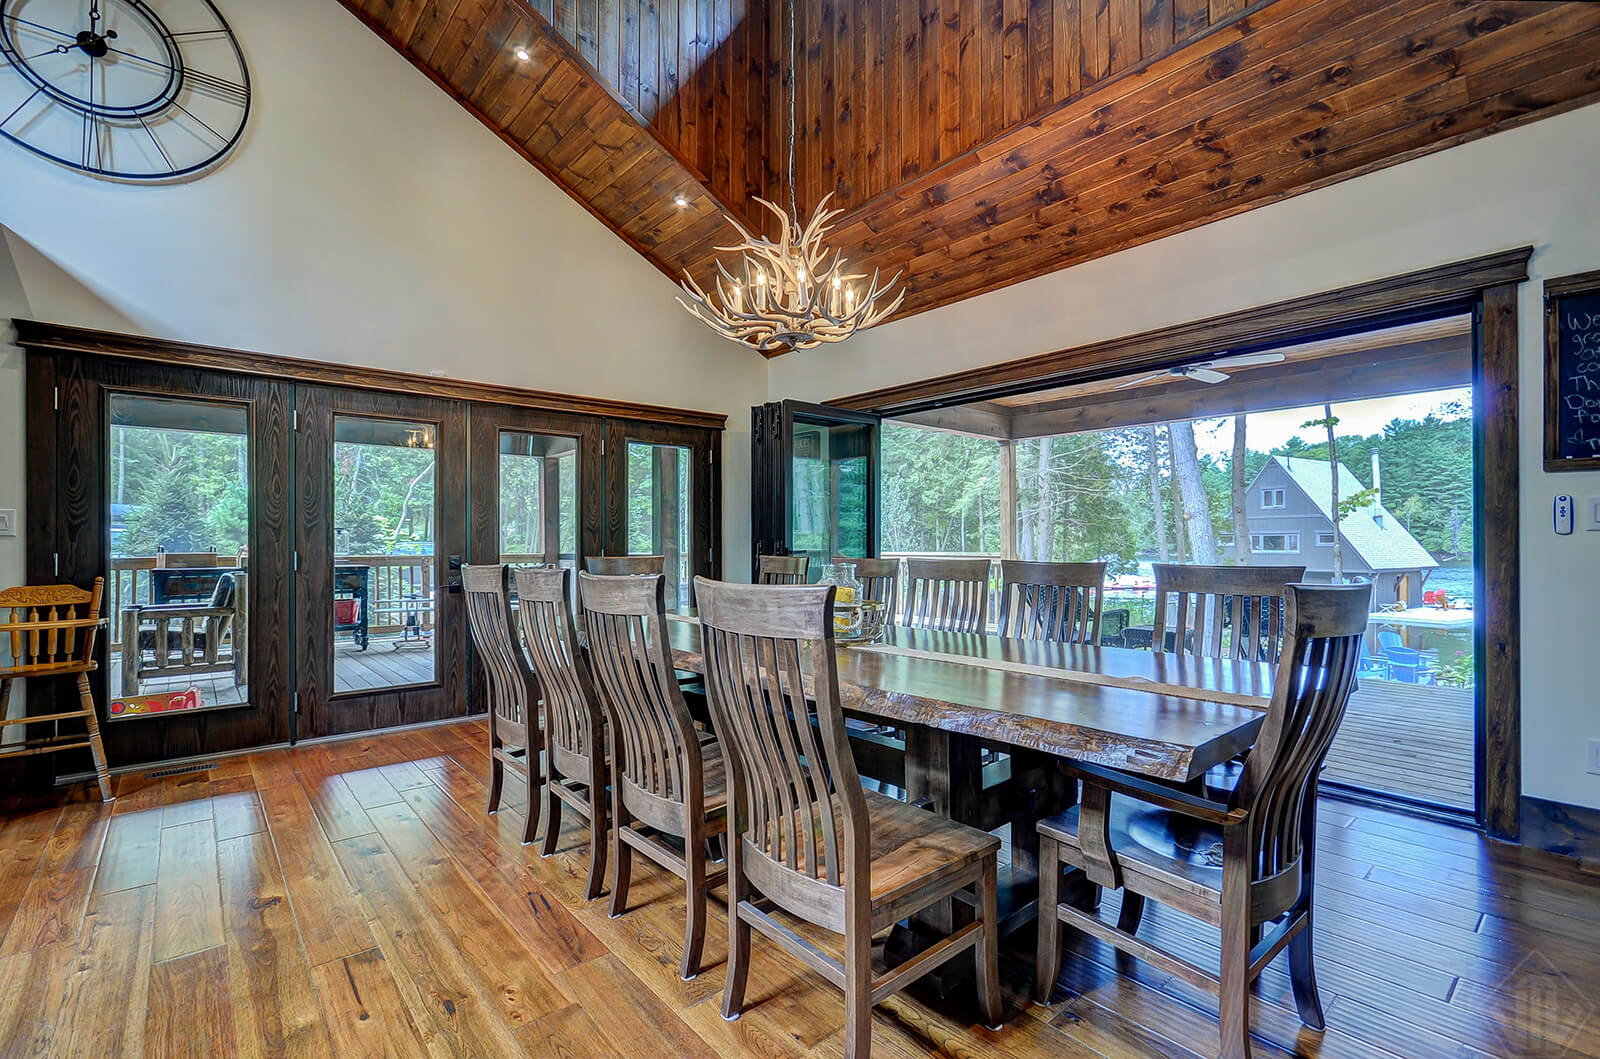 Cottage Dining Room Design With Large Windows